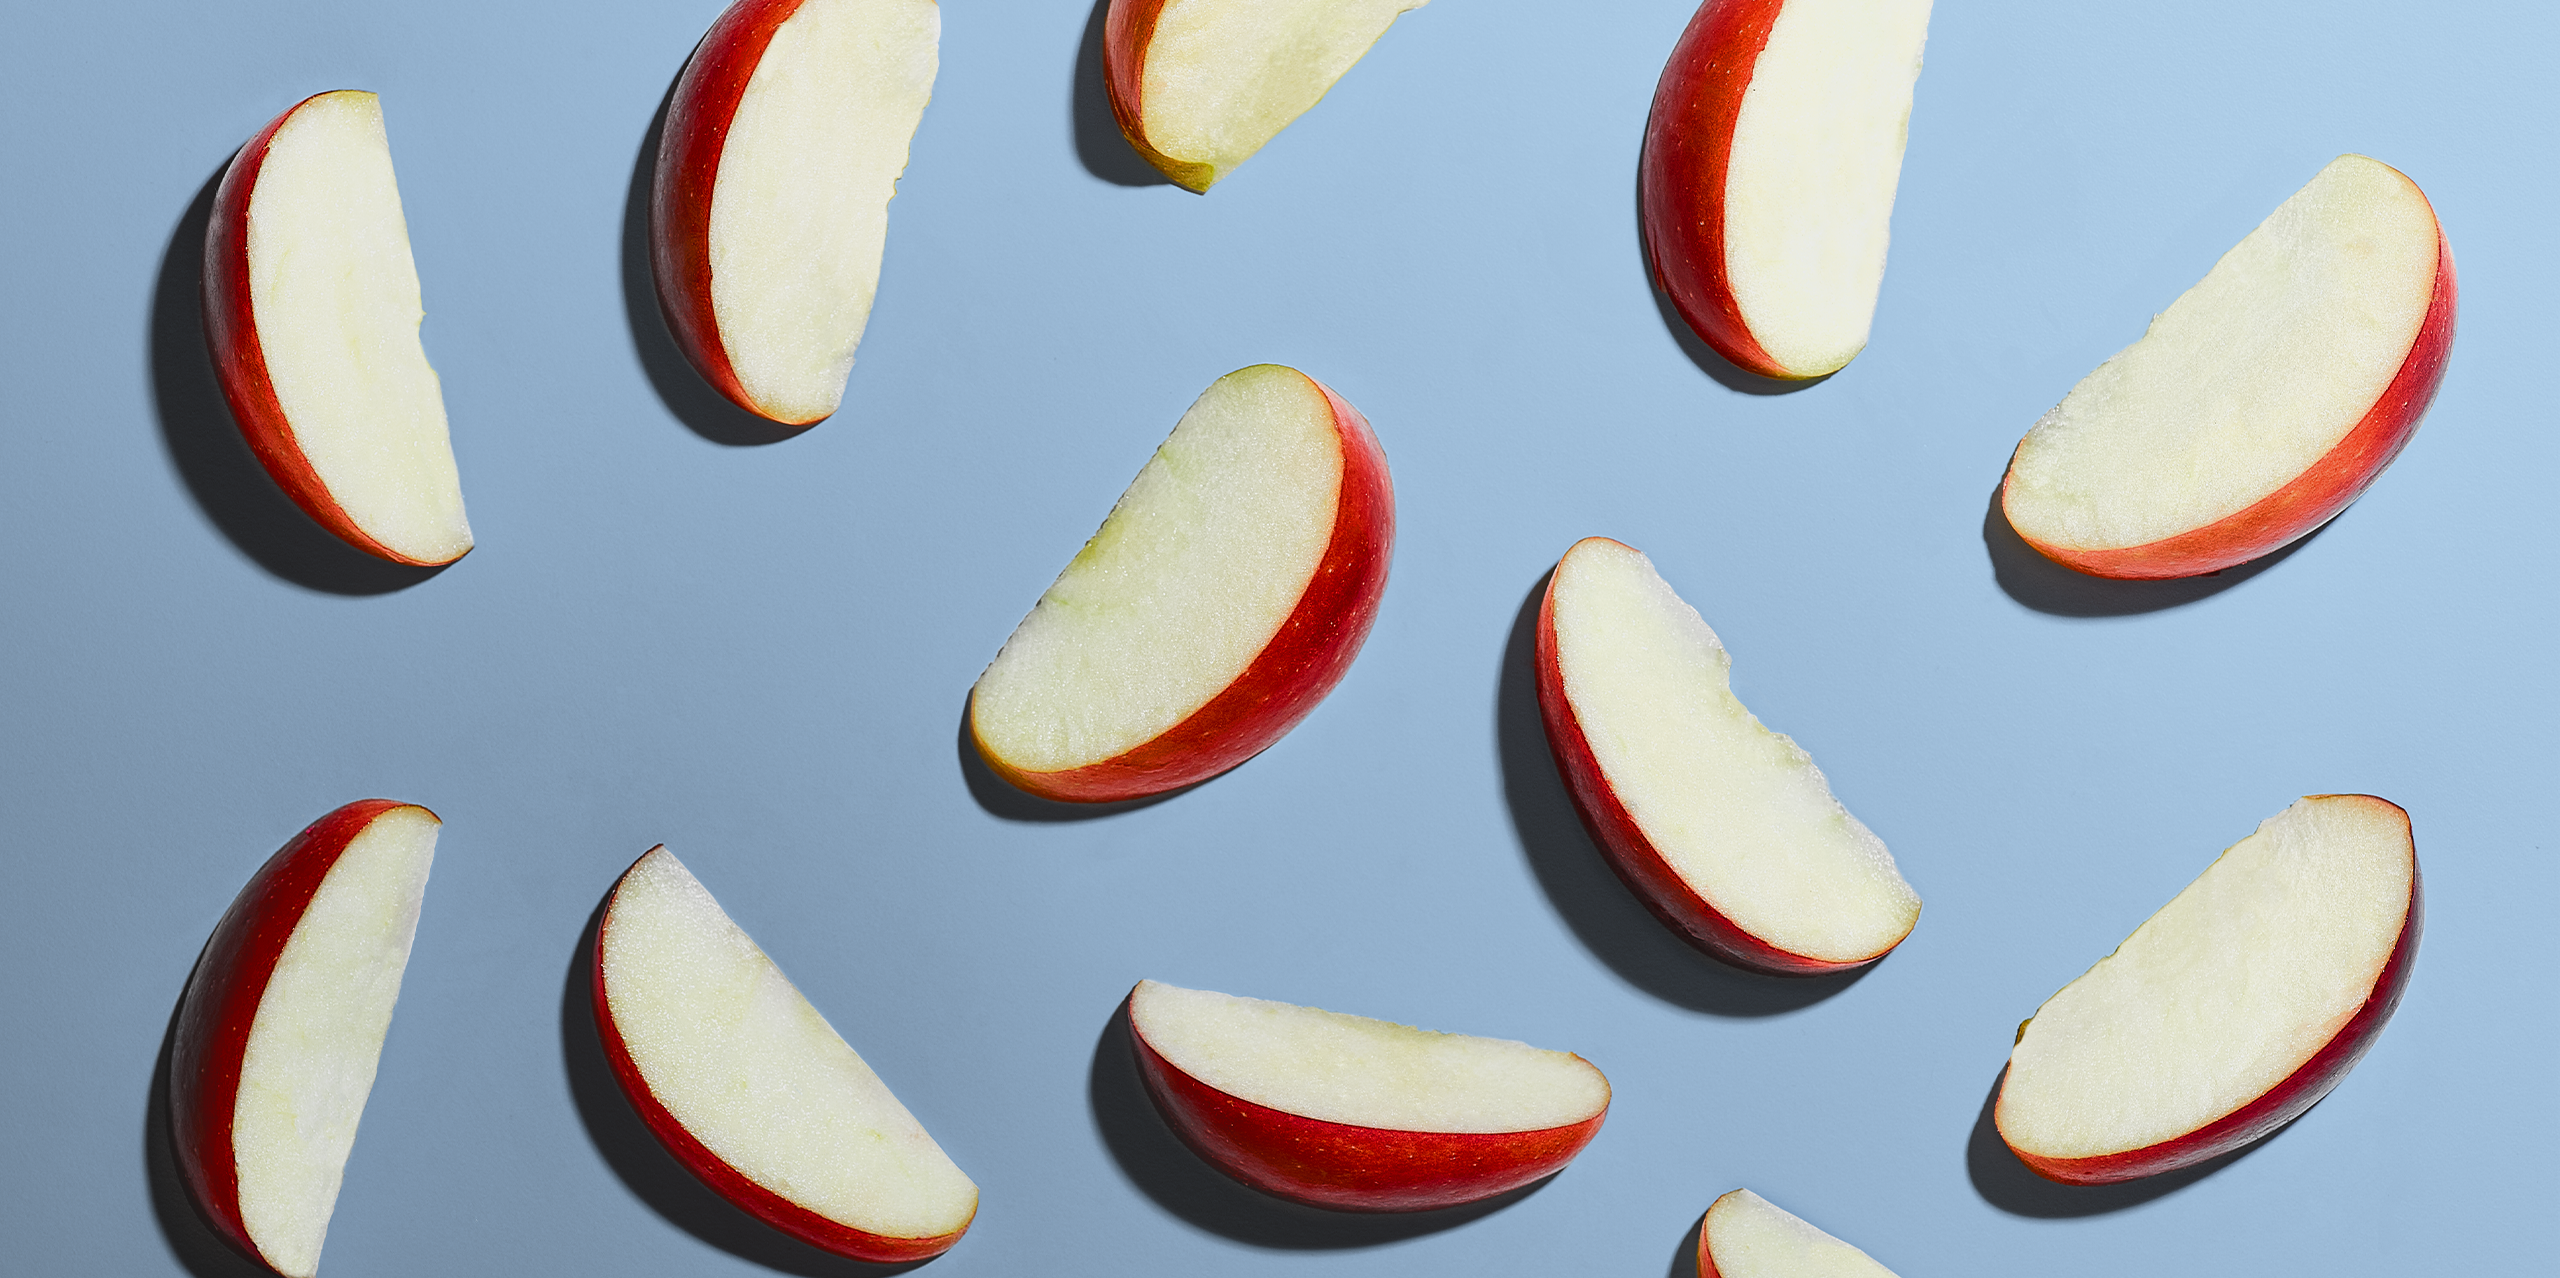 12 individual apple slices laid flat on a blue background.